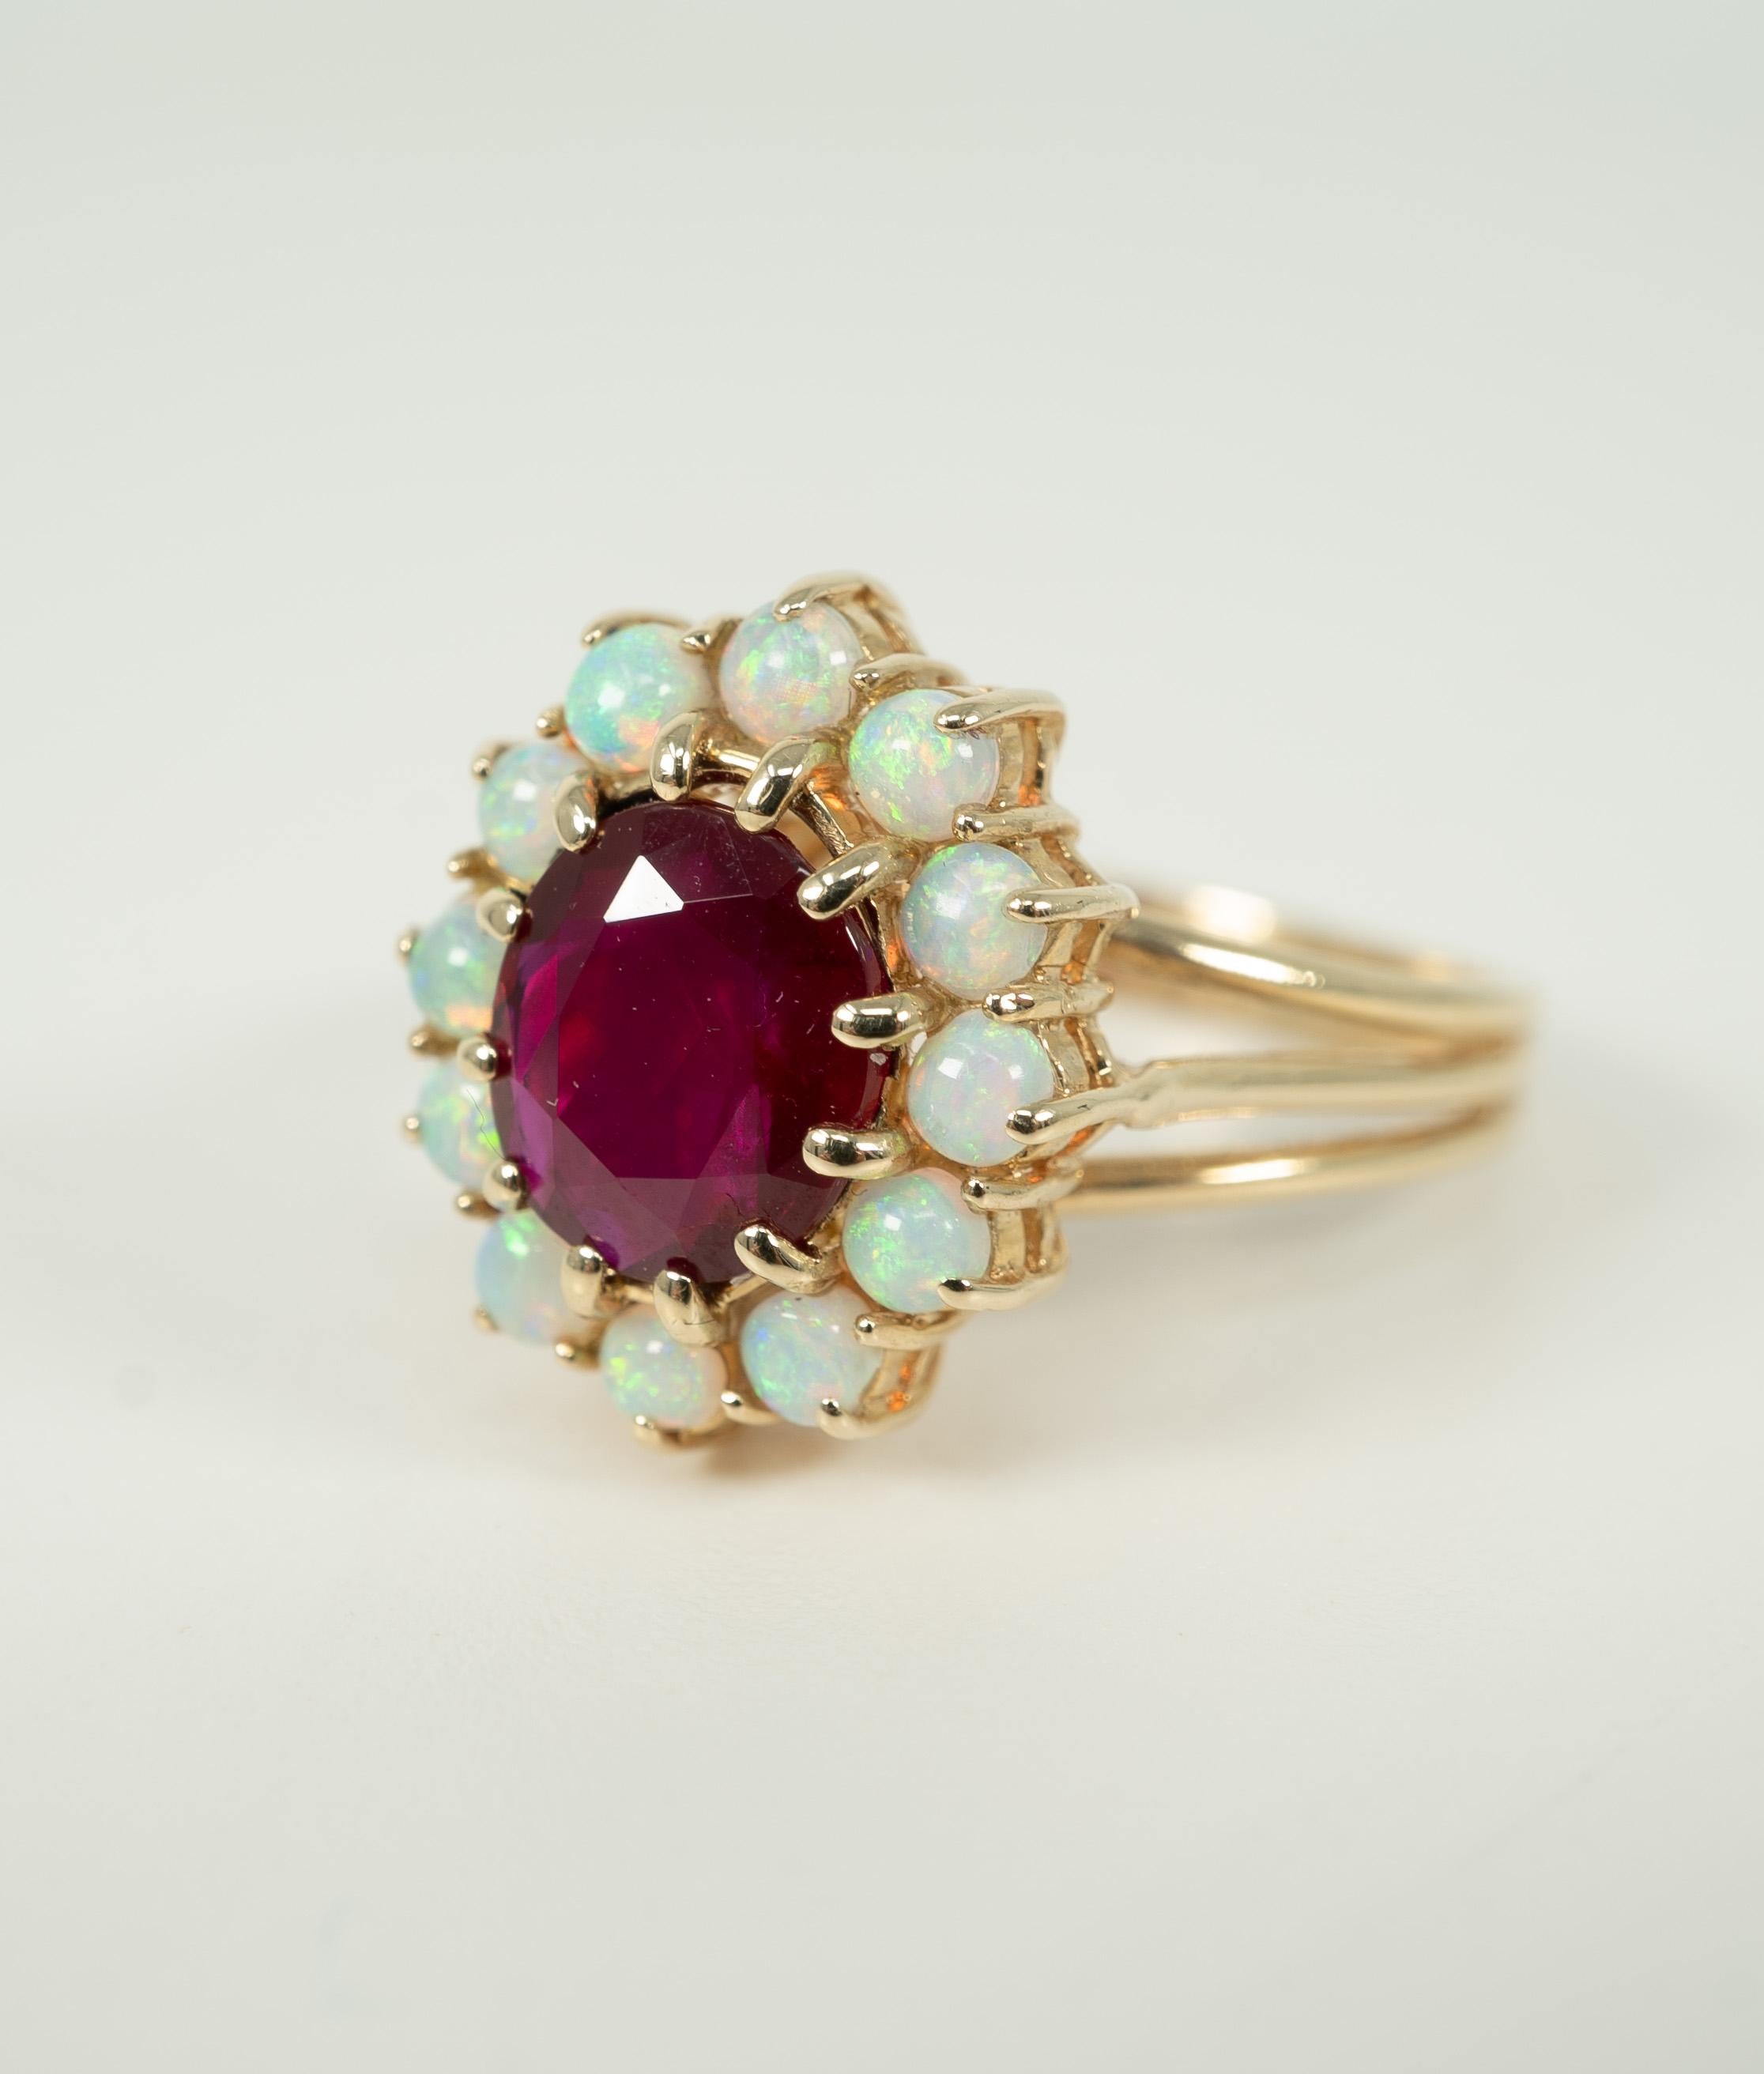 Lovely opals surround this oval-shaped 2.23 carat Burma ruby.    